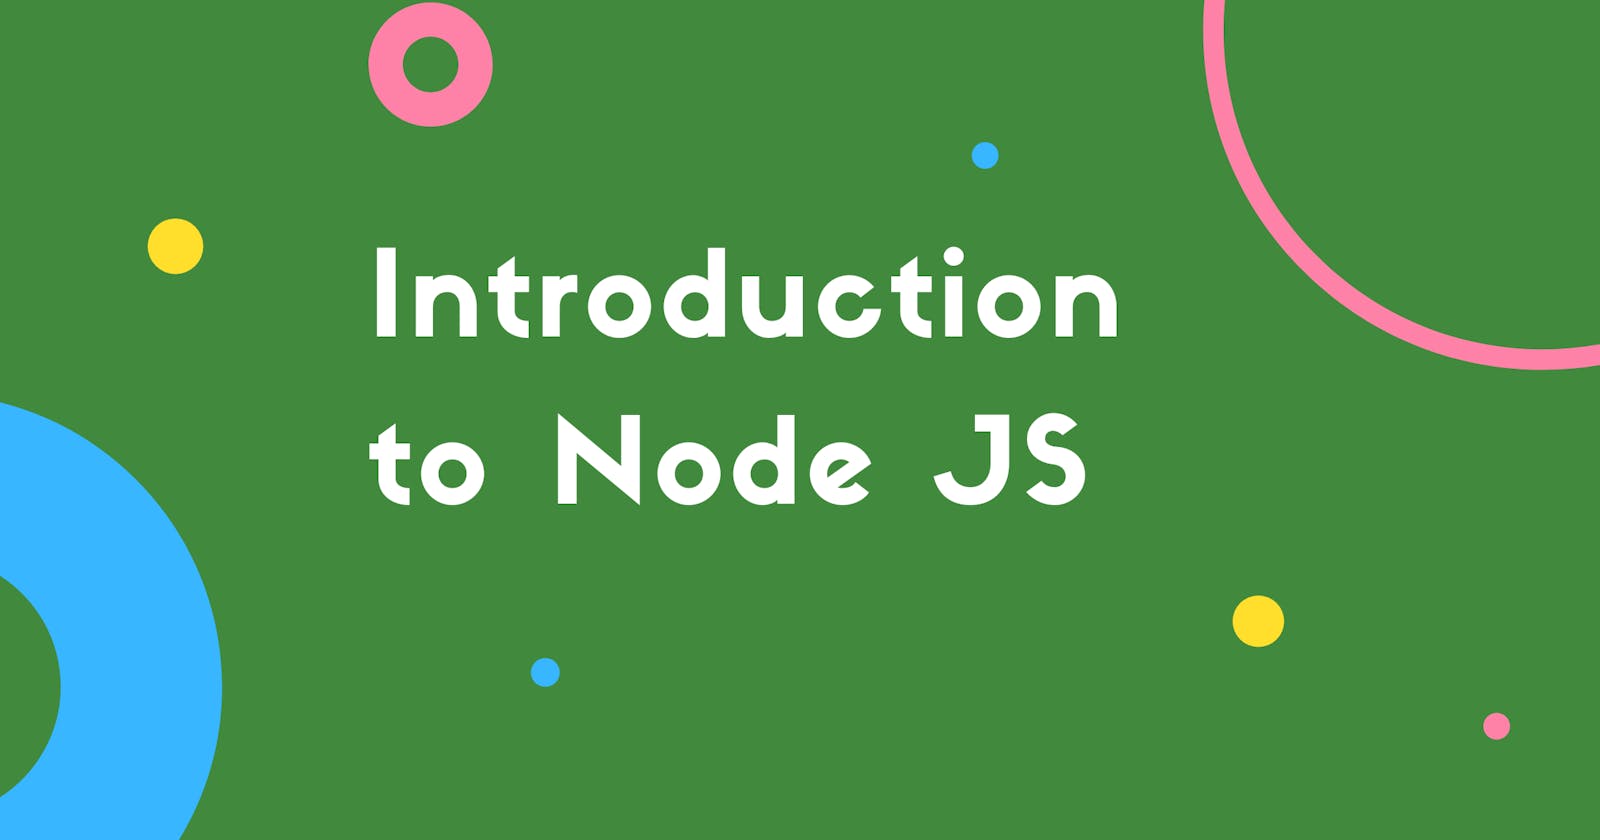 Introduction to NodeJS